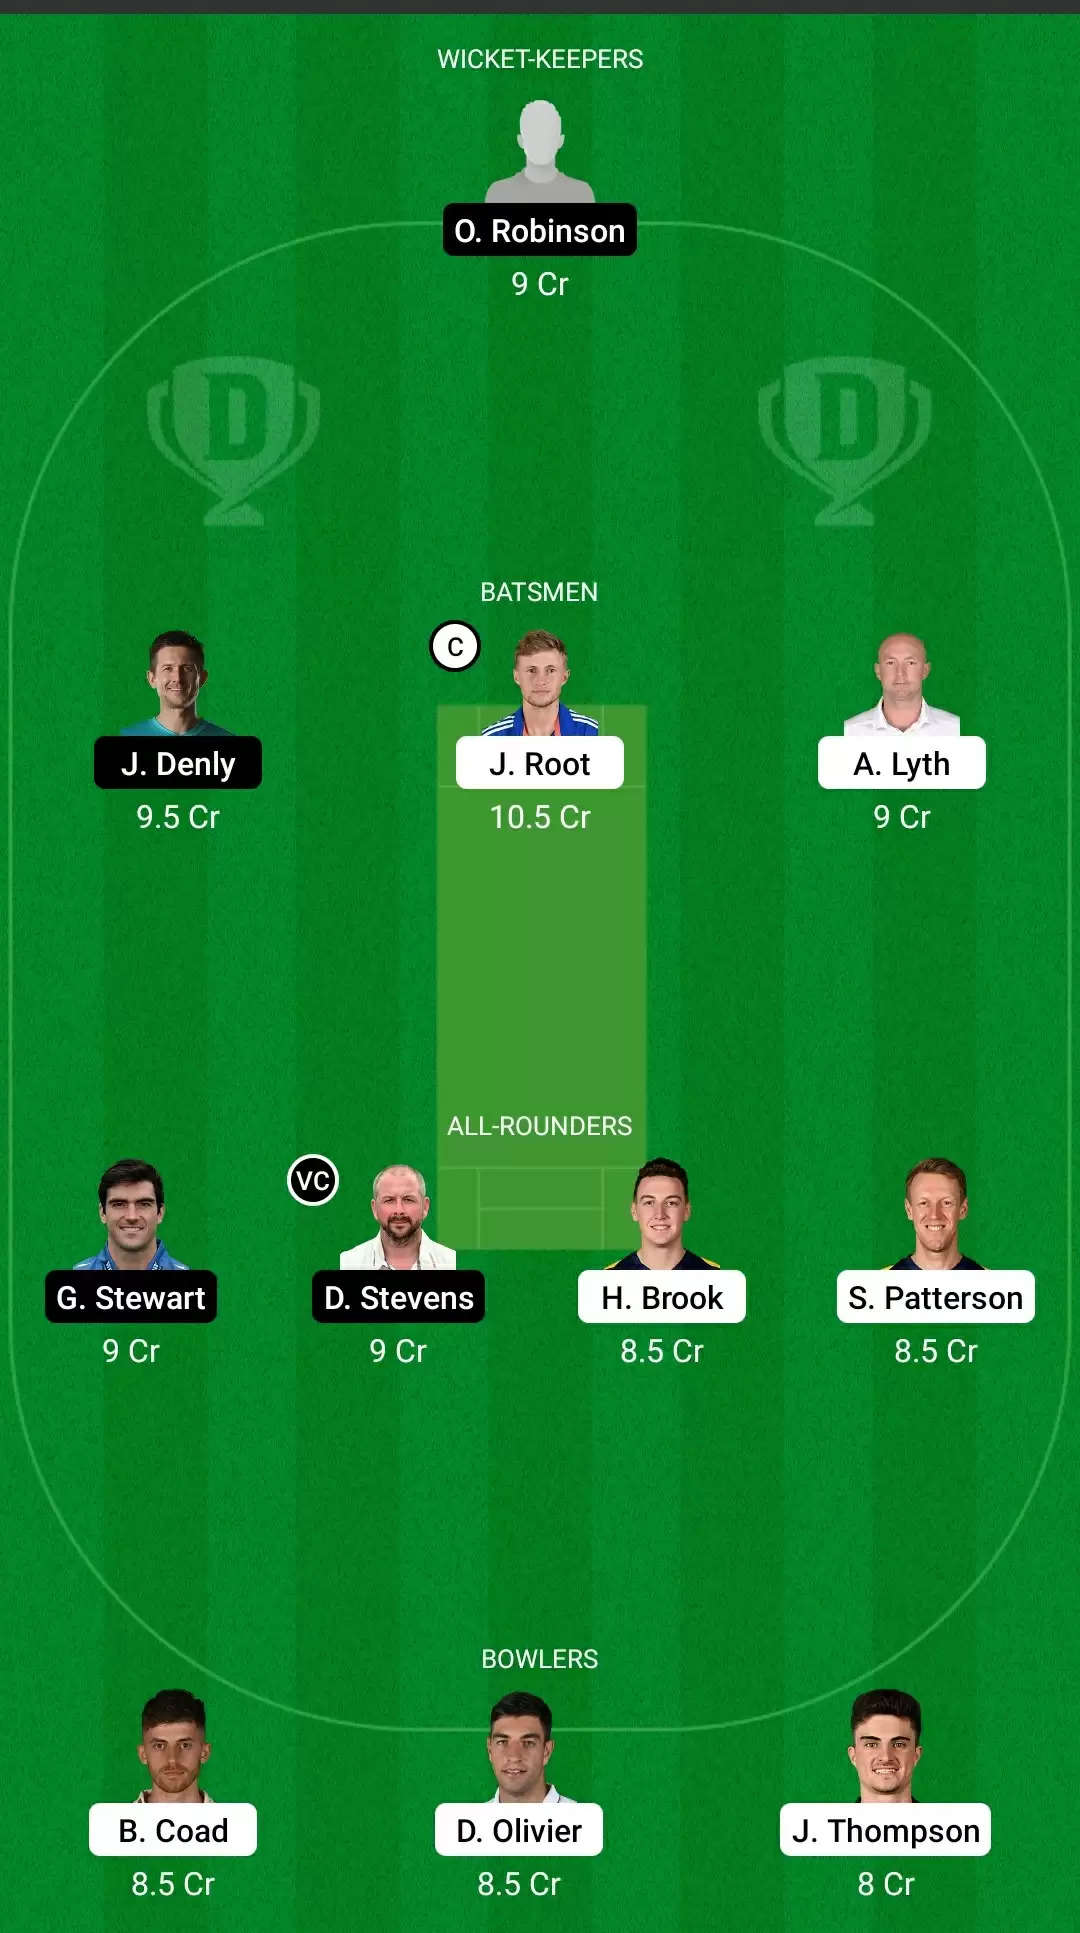 English Test County Championship 2021, Match 42: YOR vs KET Dream11 Prediction, Fantasy Cricket Tips, Team, Playing 11, Pitch Report, Weather Conditions and Injury Update